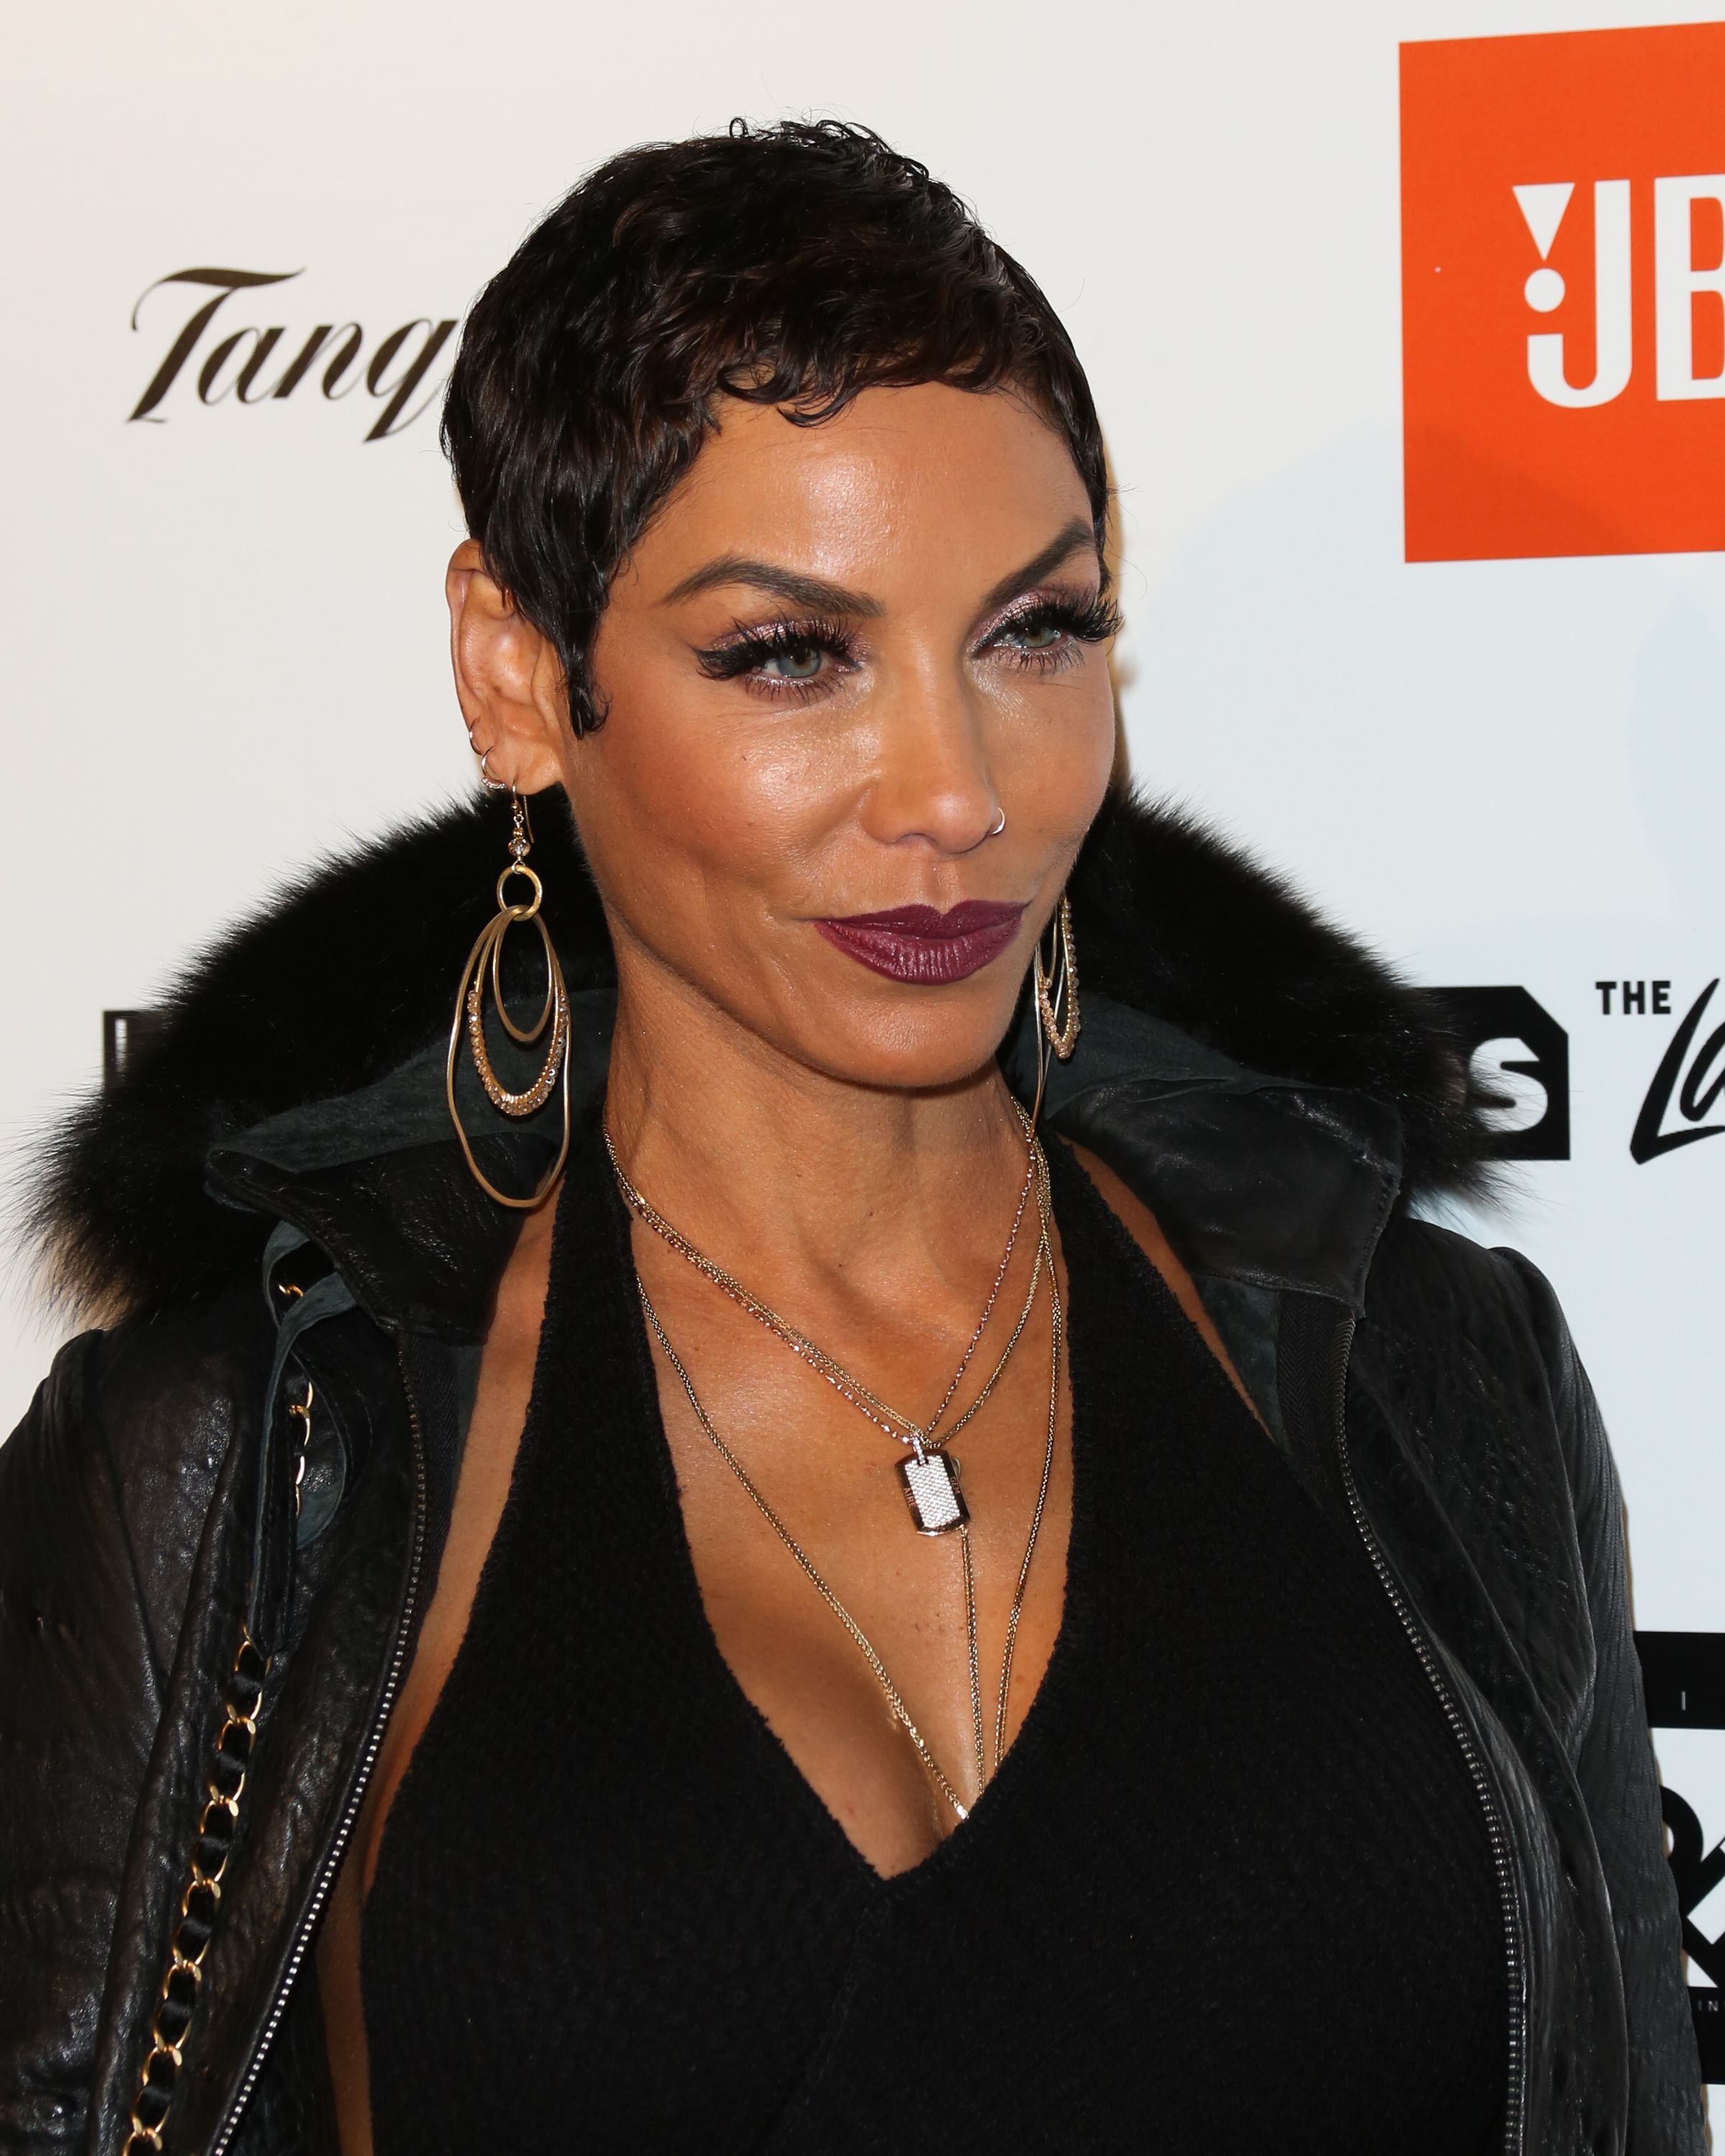 Nicole Murphy at Kenny 'The Jet' Smith's annual All-Star bash in California on February 16, 2018 | Photo: Getty Images